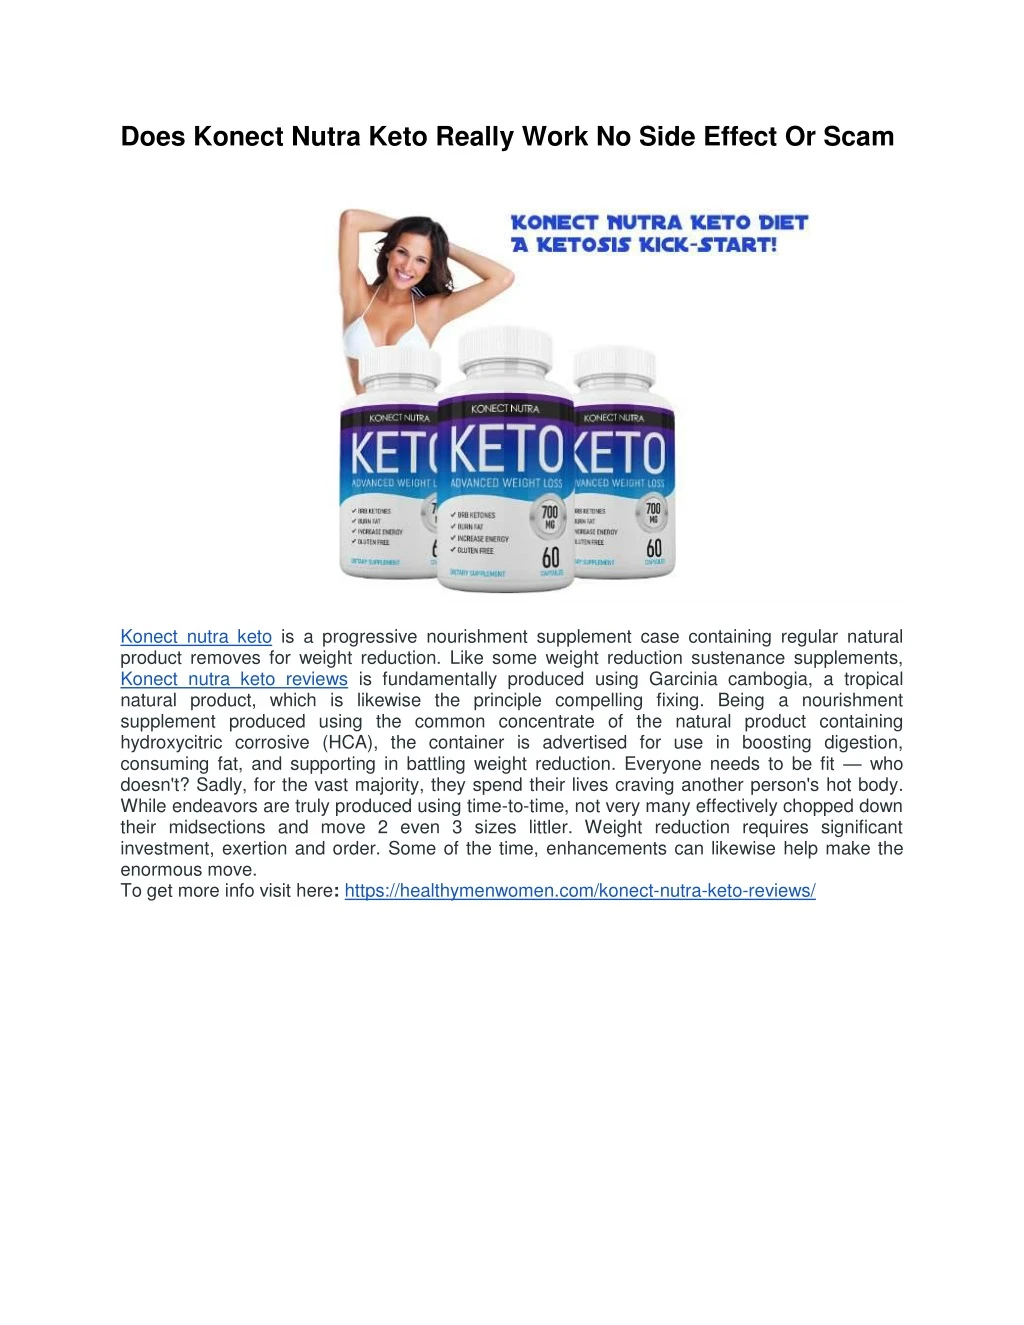 does konect nutra keto really work no side effect